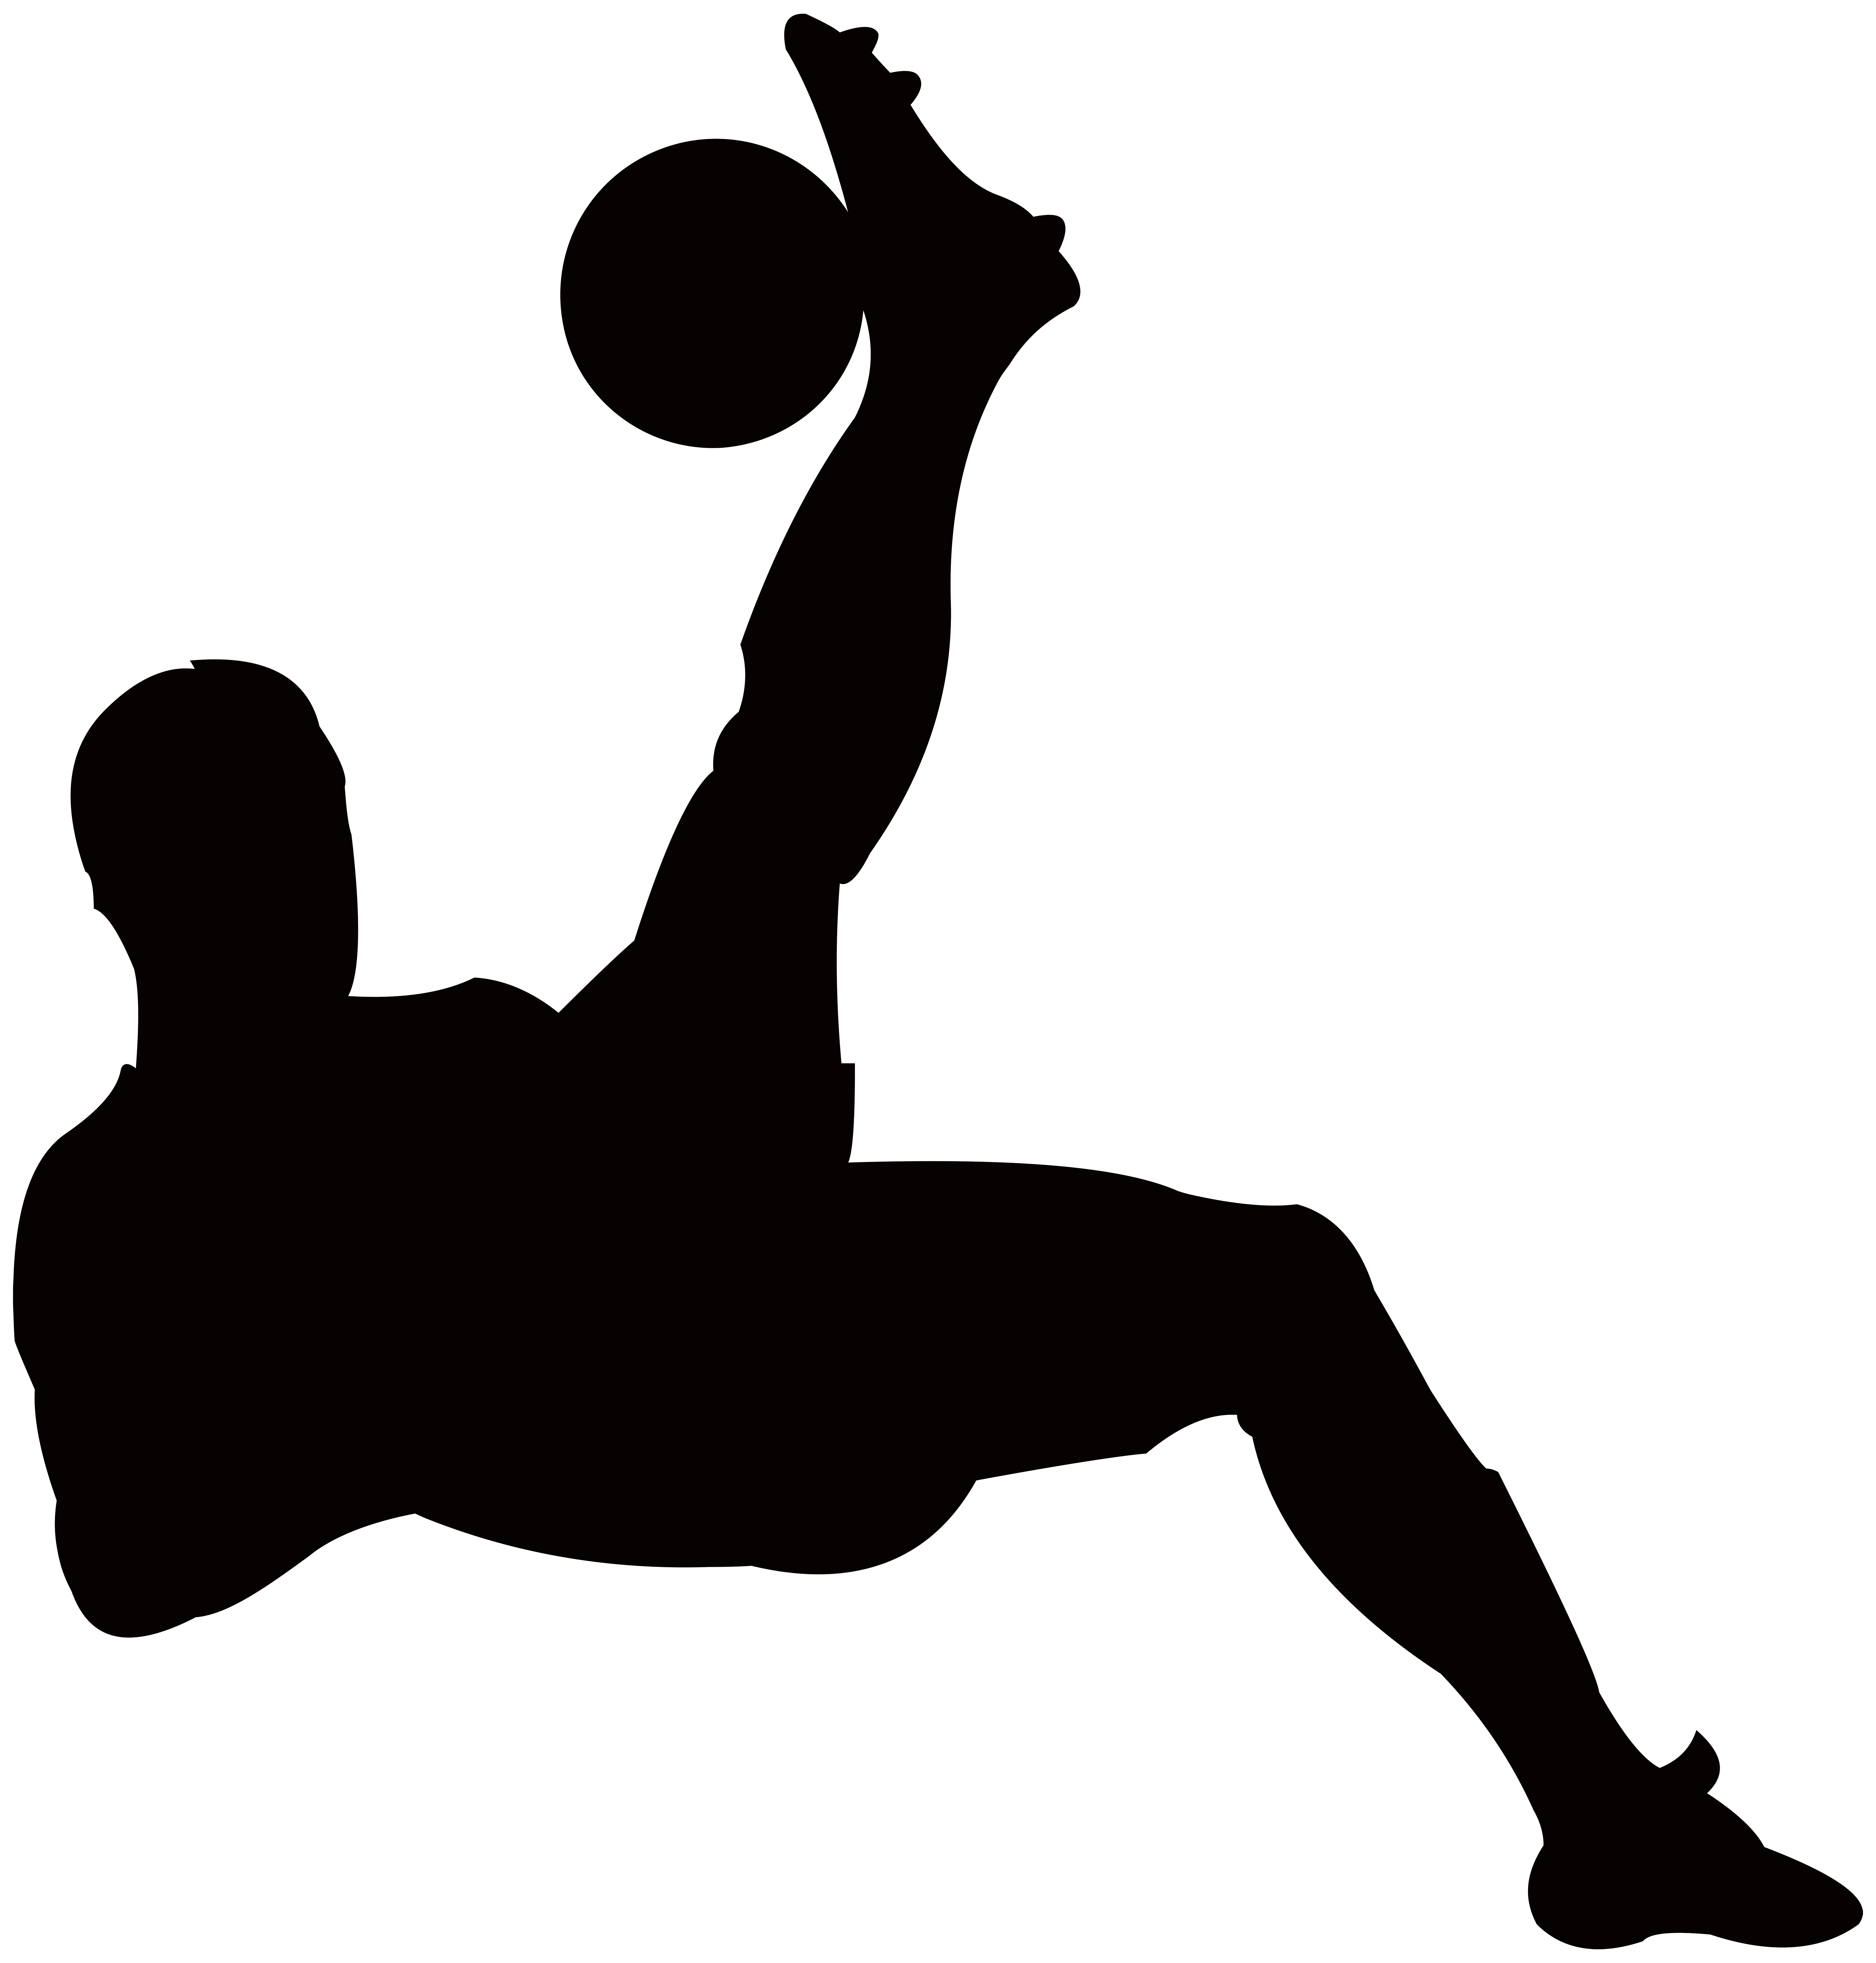 Football Player Silhouette Transparent PNG Clip Art Image.